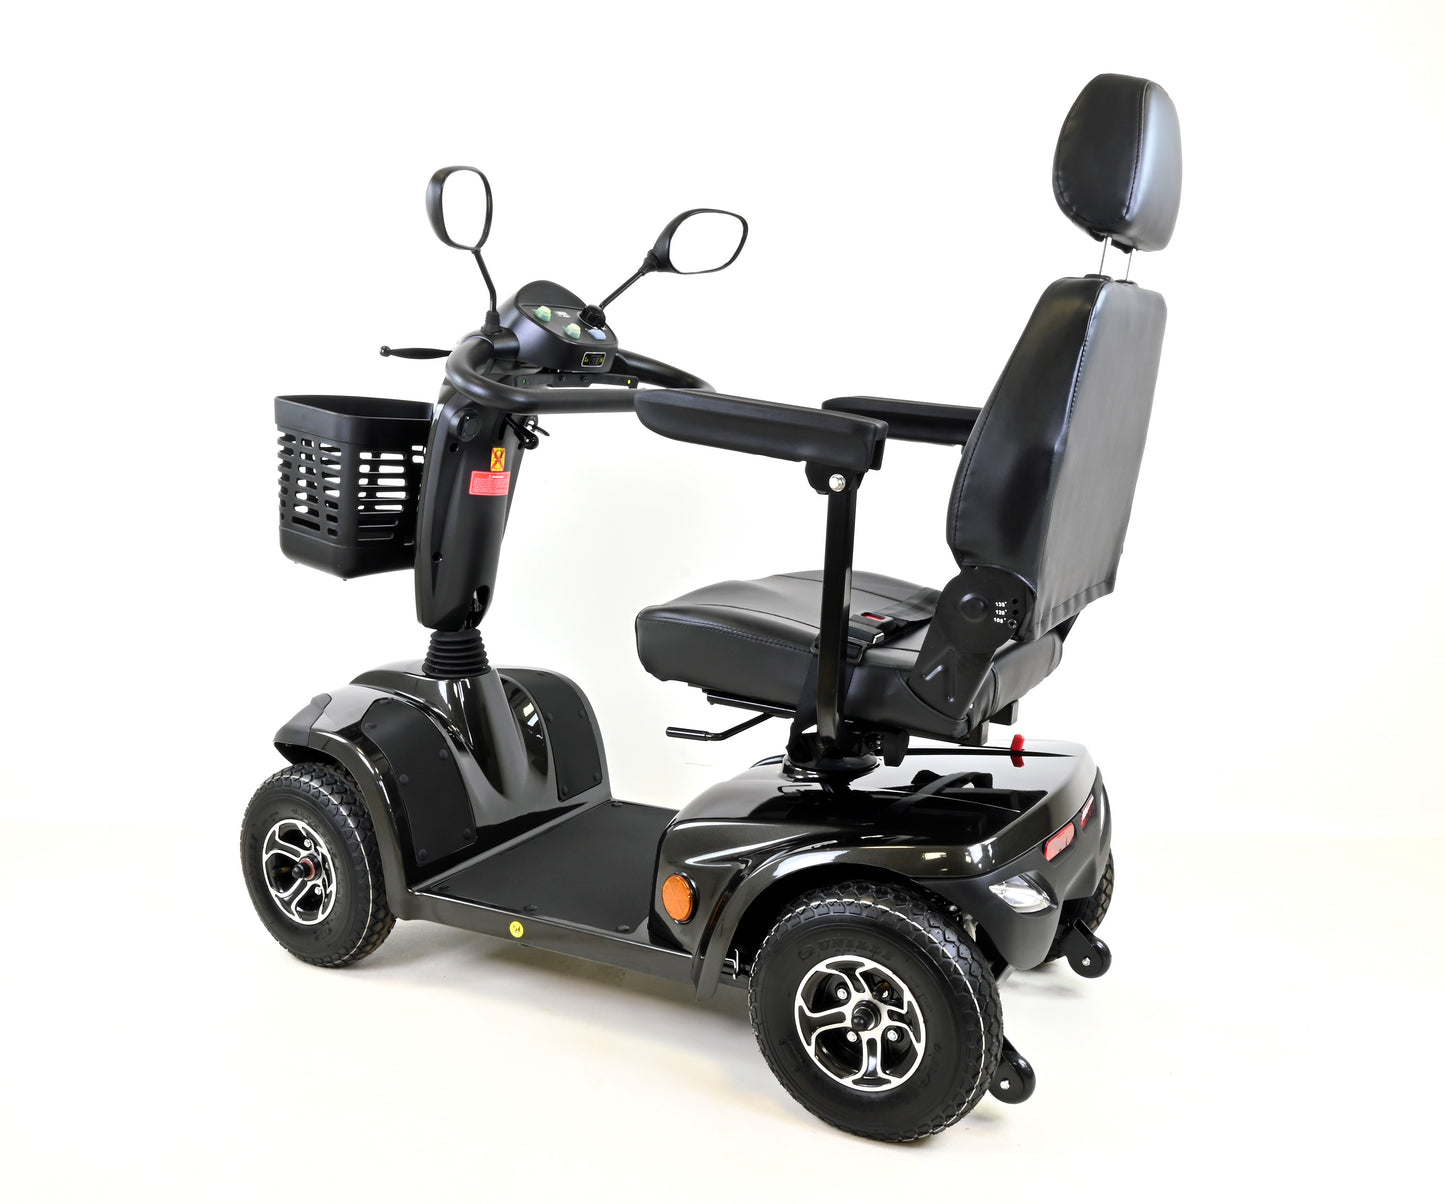 Phoenix 8 mph Mobility Scooter